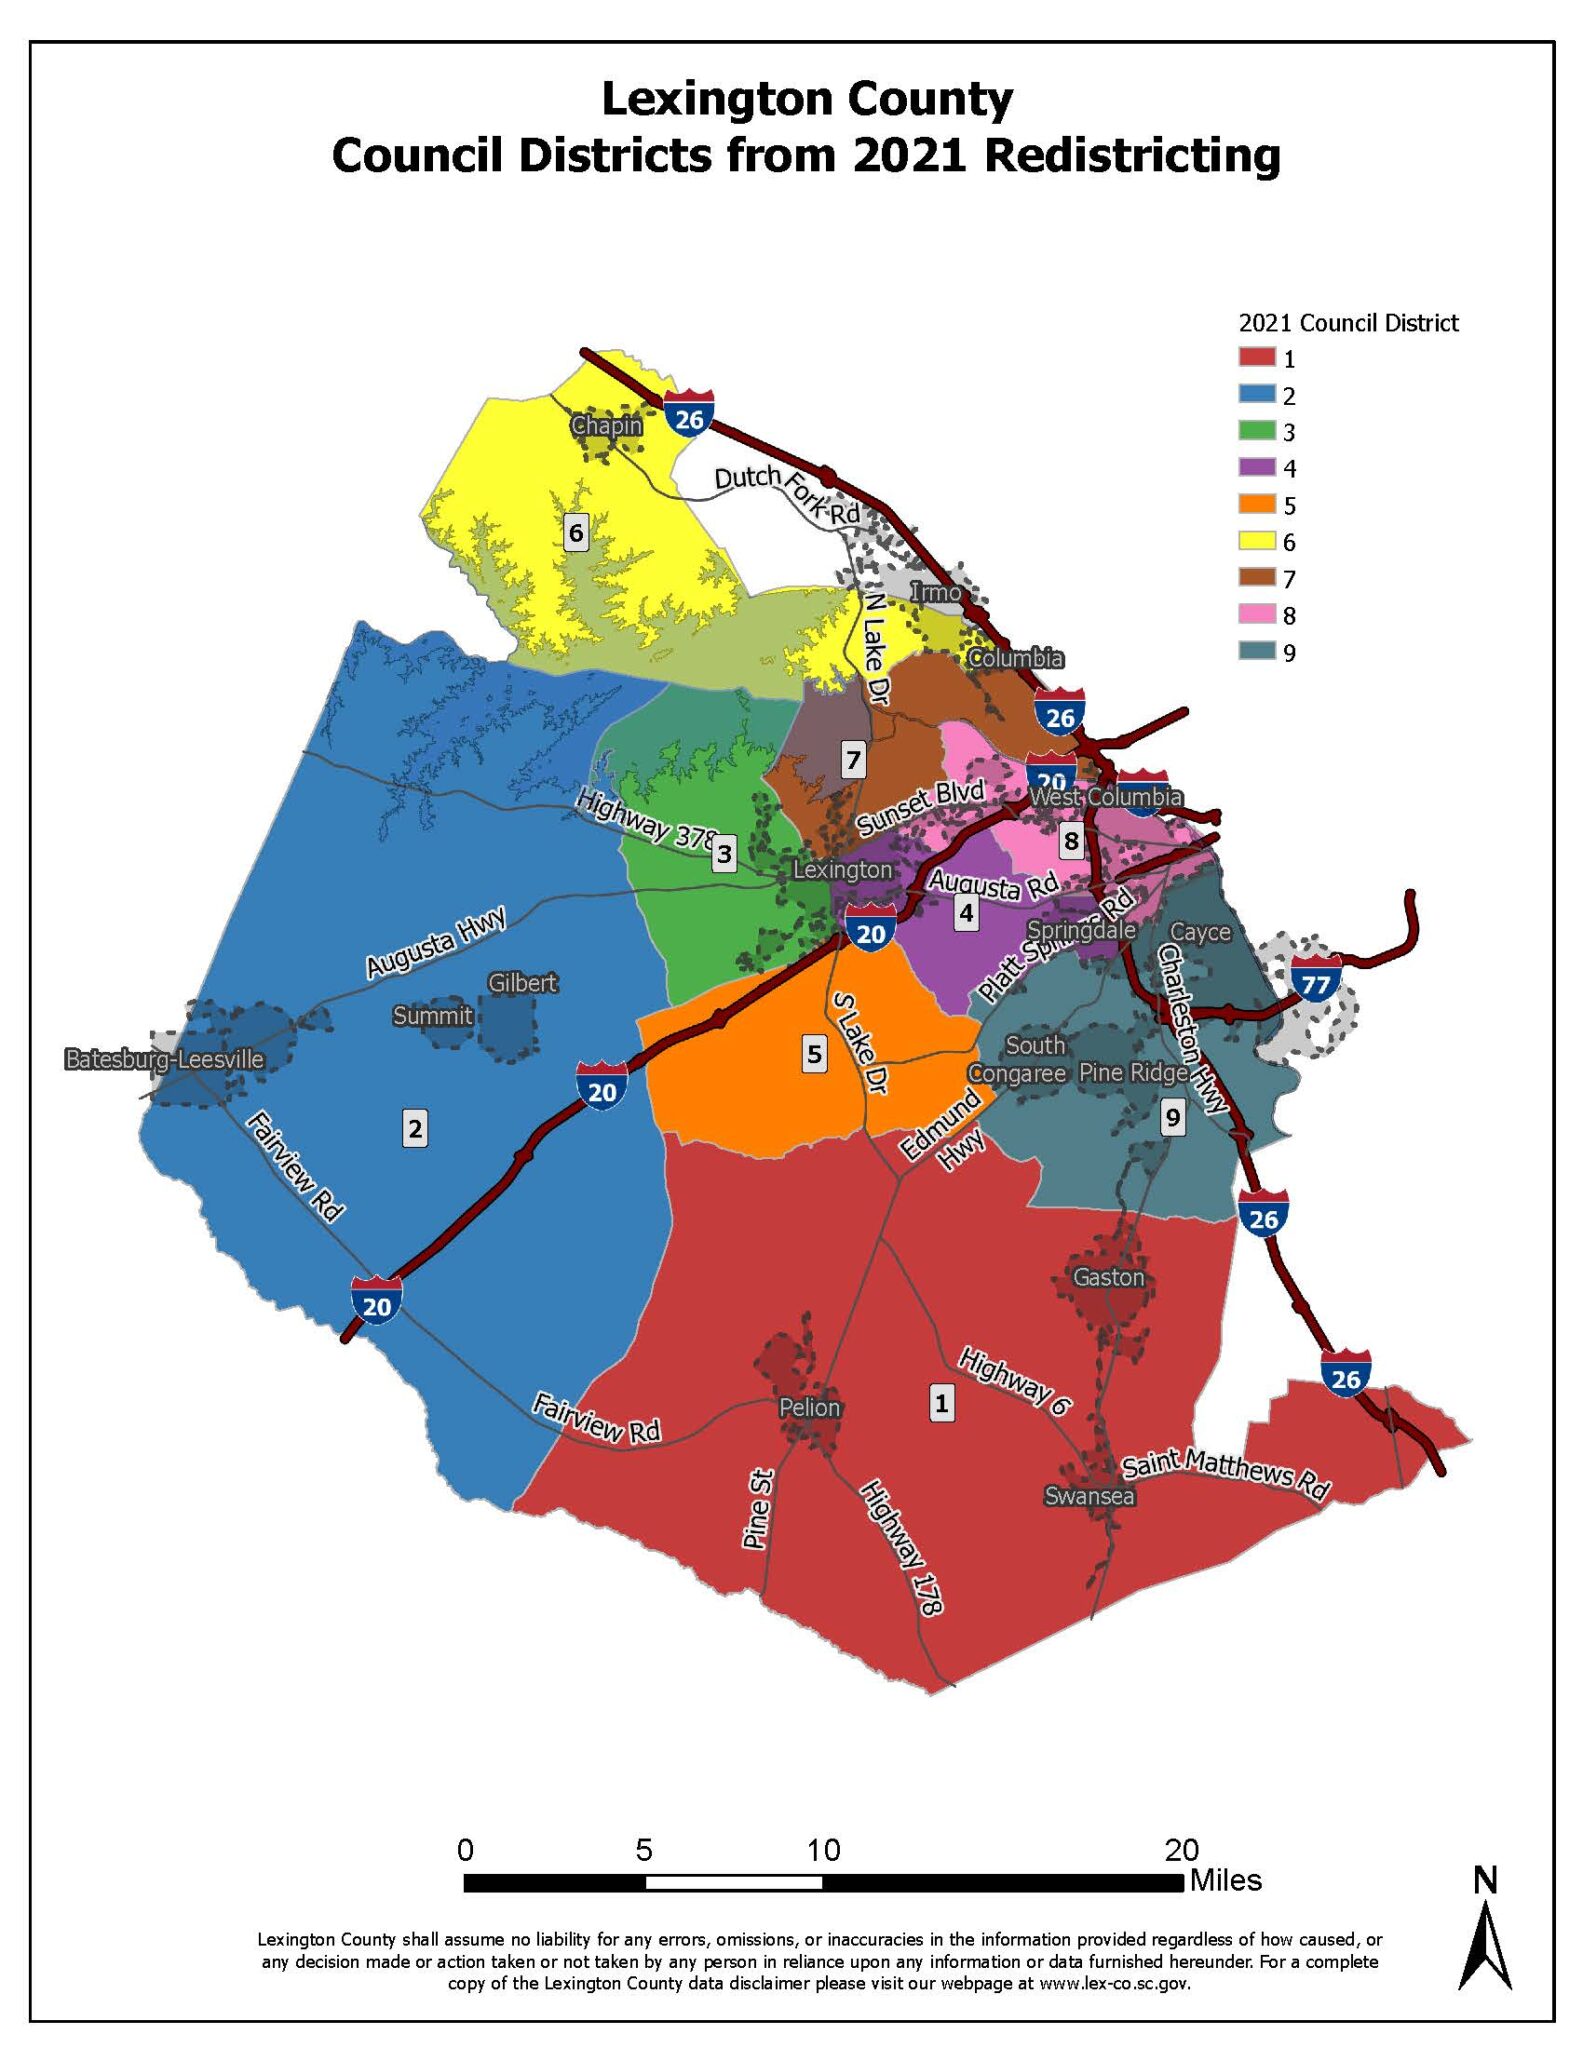 Lexington County redistricting map includes changes to council district